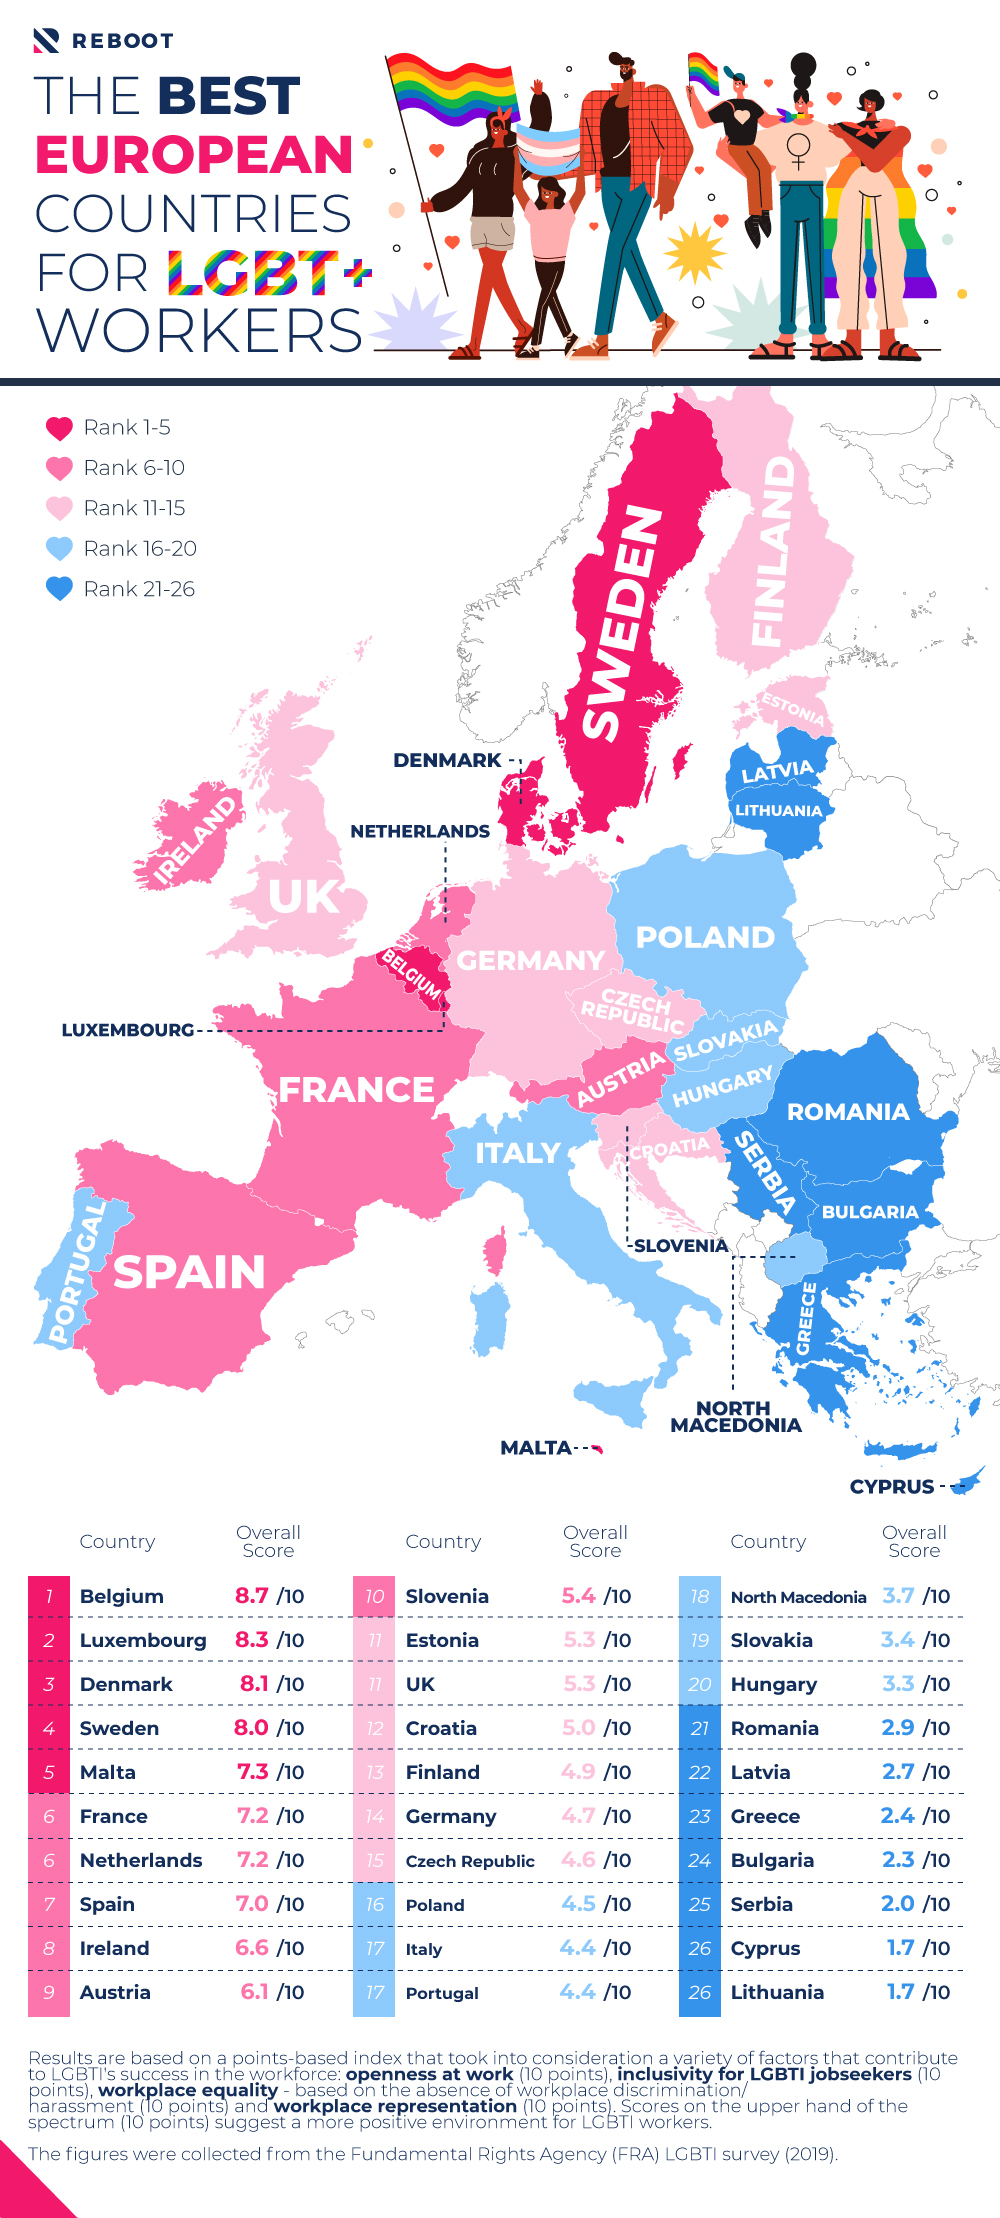 The best European countries for LGBT+ workers